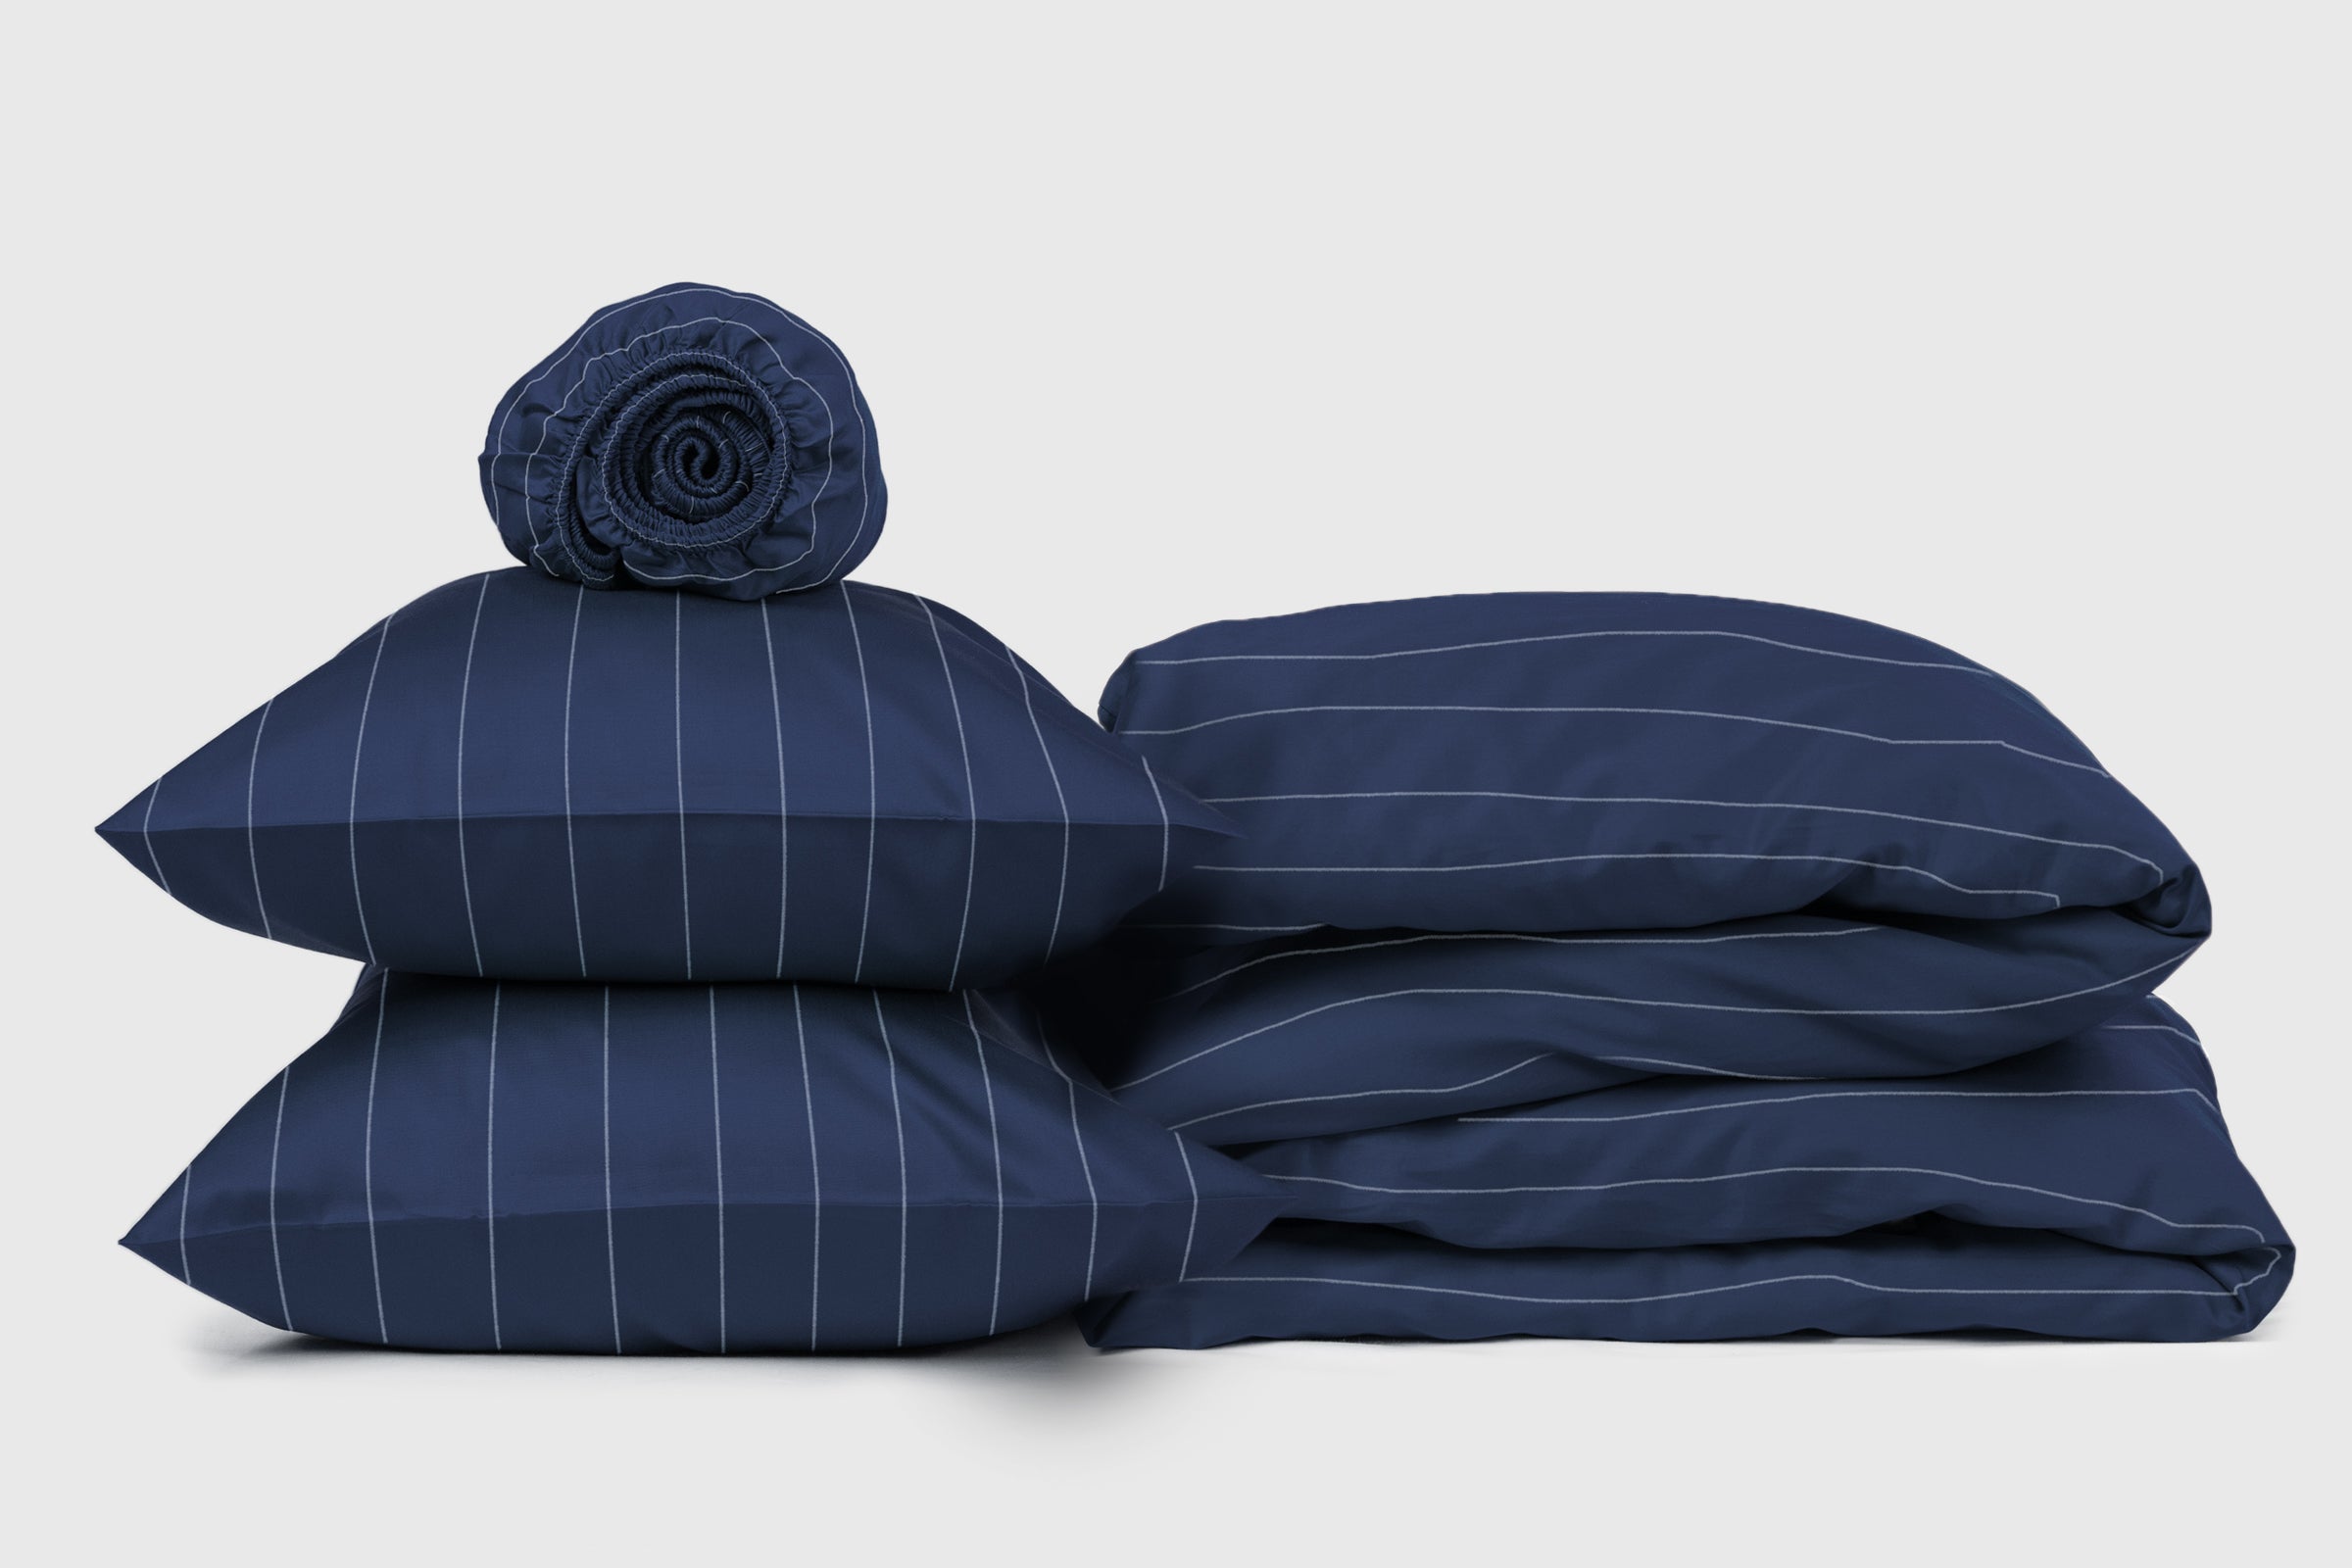 classic-navy-pinstripes-bundle-set-fitted-sheet-duvet-cover-pillowcase-pair-by-sojao.jpg